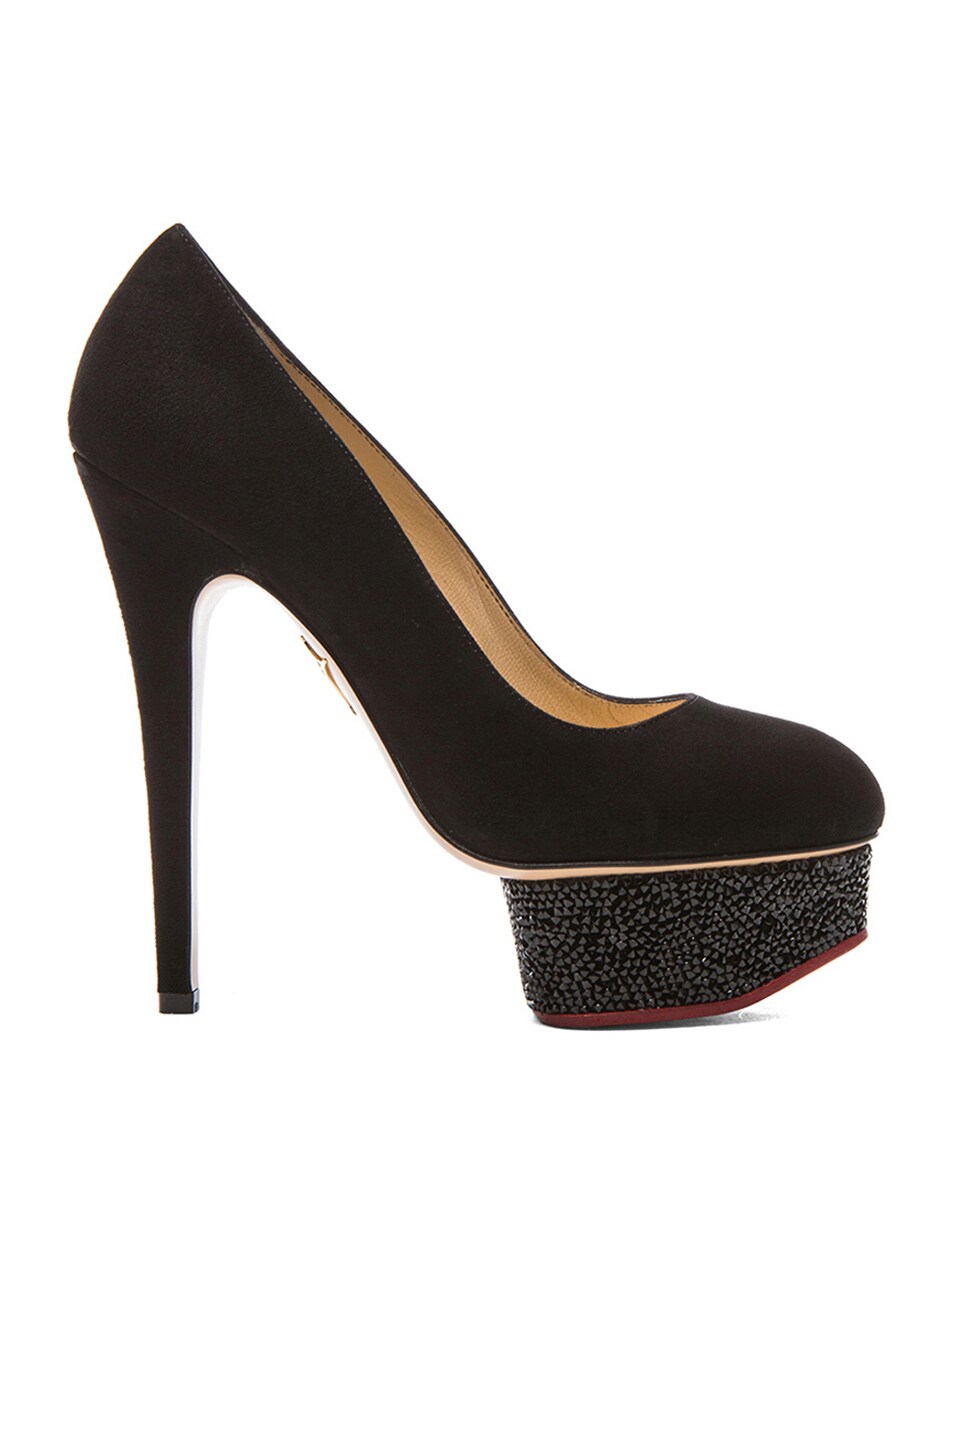 Image 1 of Charlotte Olympia Dolly Suede Pumps with Swarovski Platform in Black